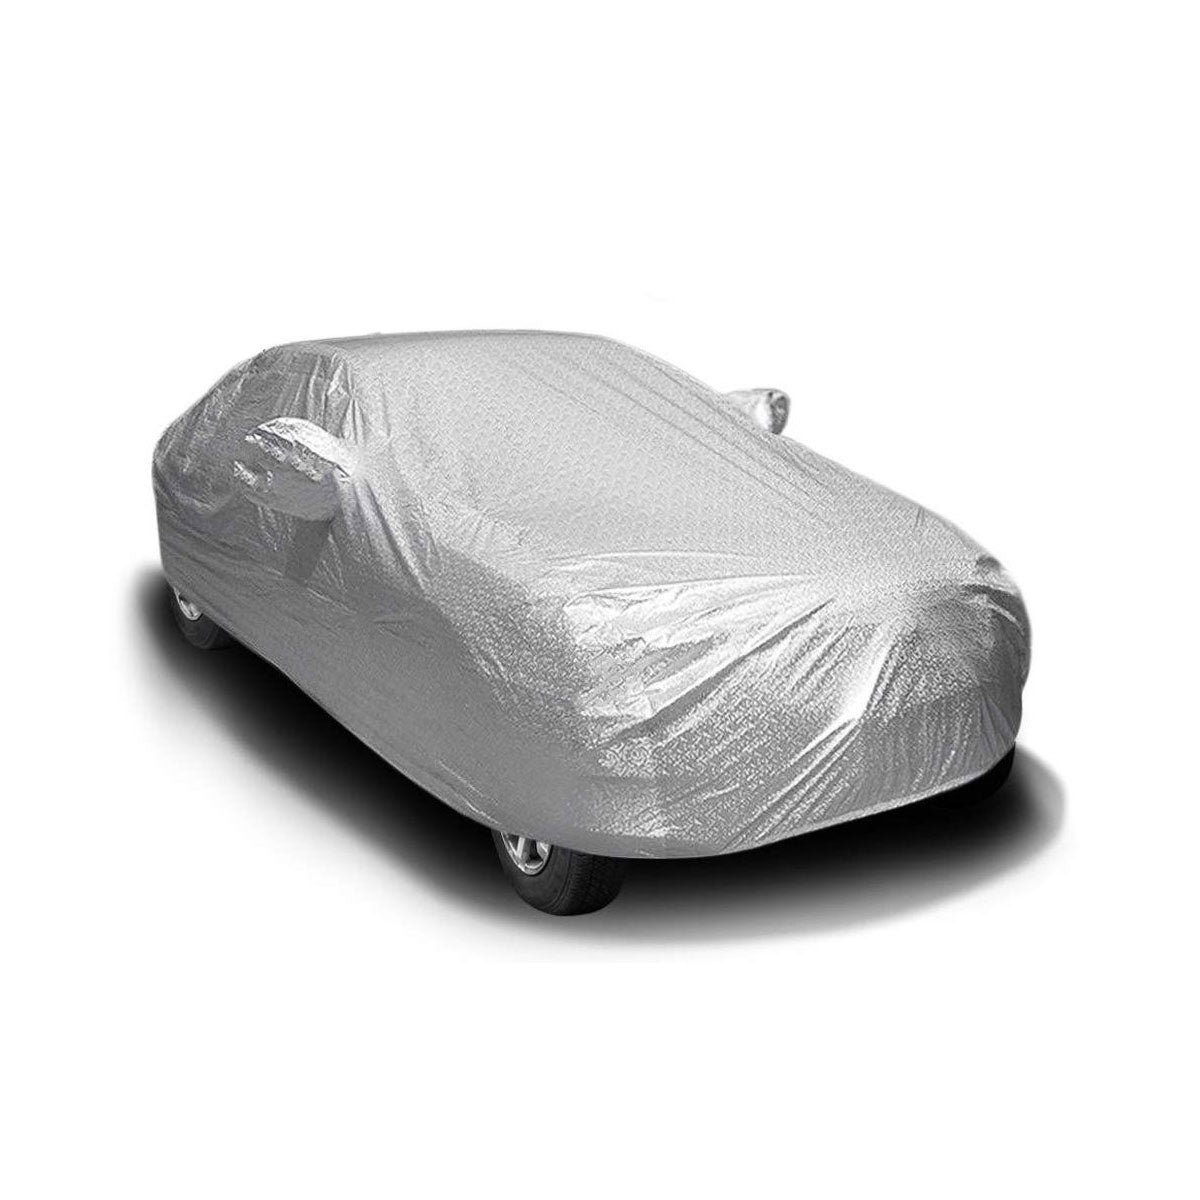 Oshotto Spyro Silver Anti Reflective, dustproof and Water Proof Car Body Cover with Mirror Pockets For Toyota Land Cruiser 200